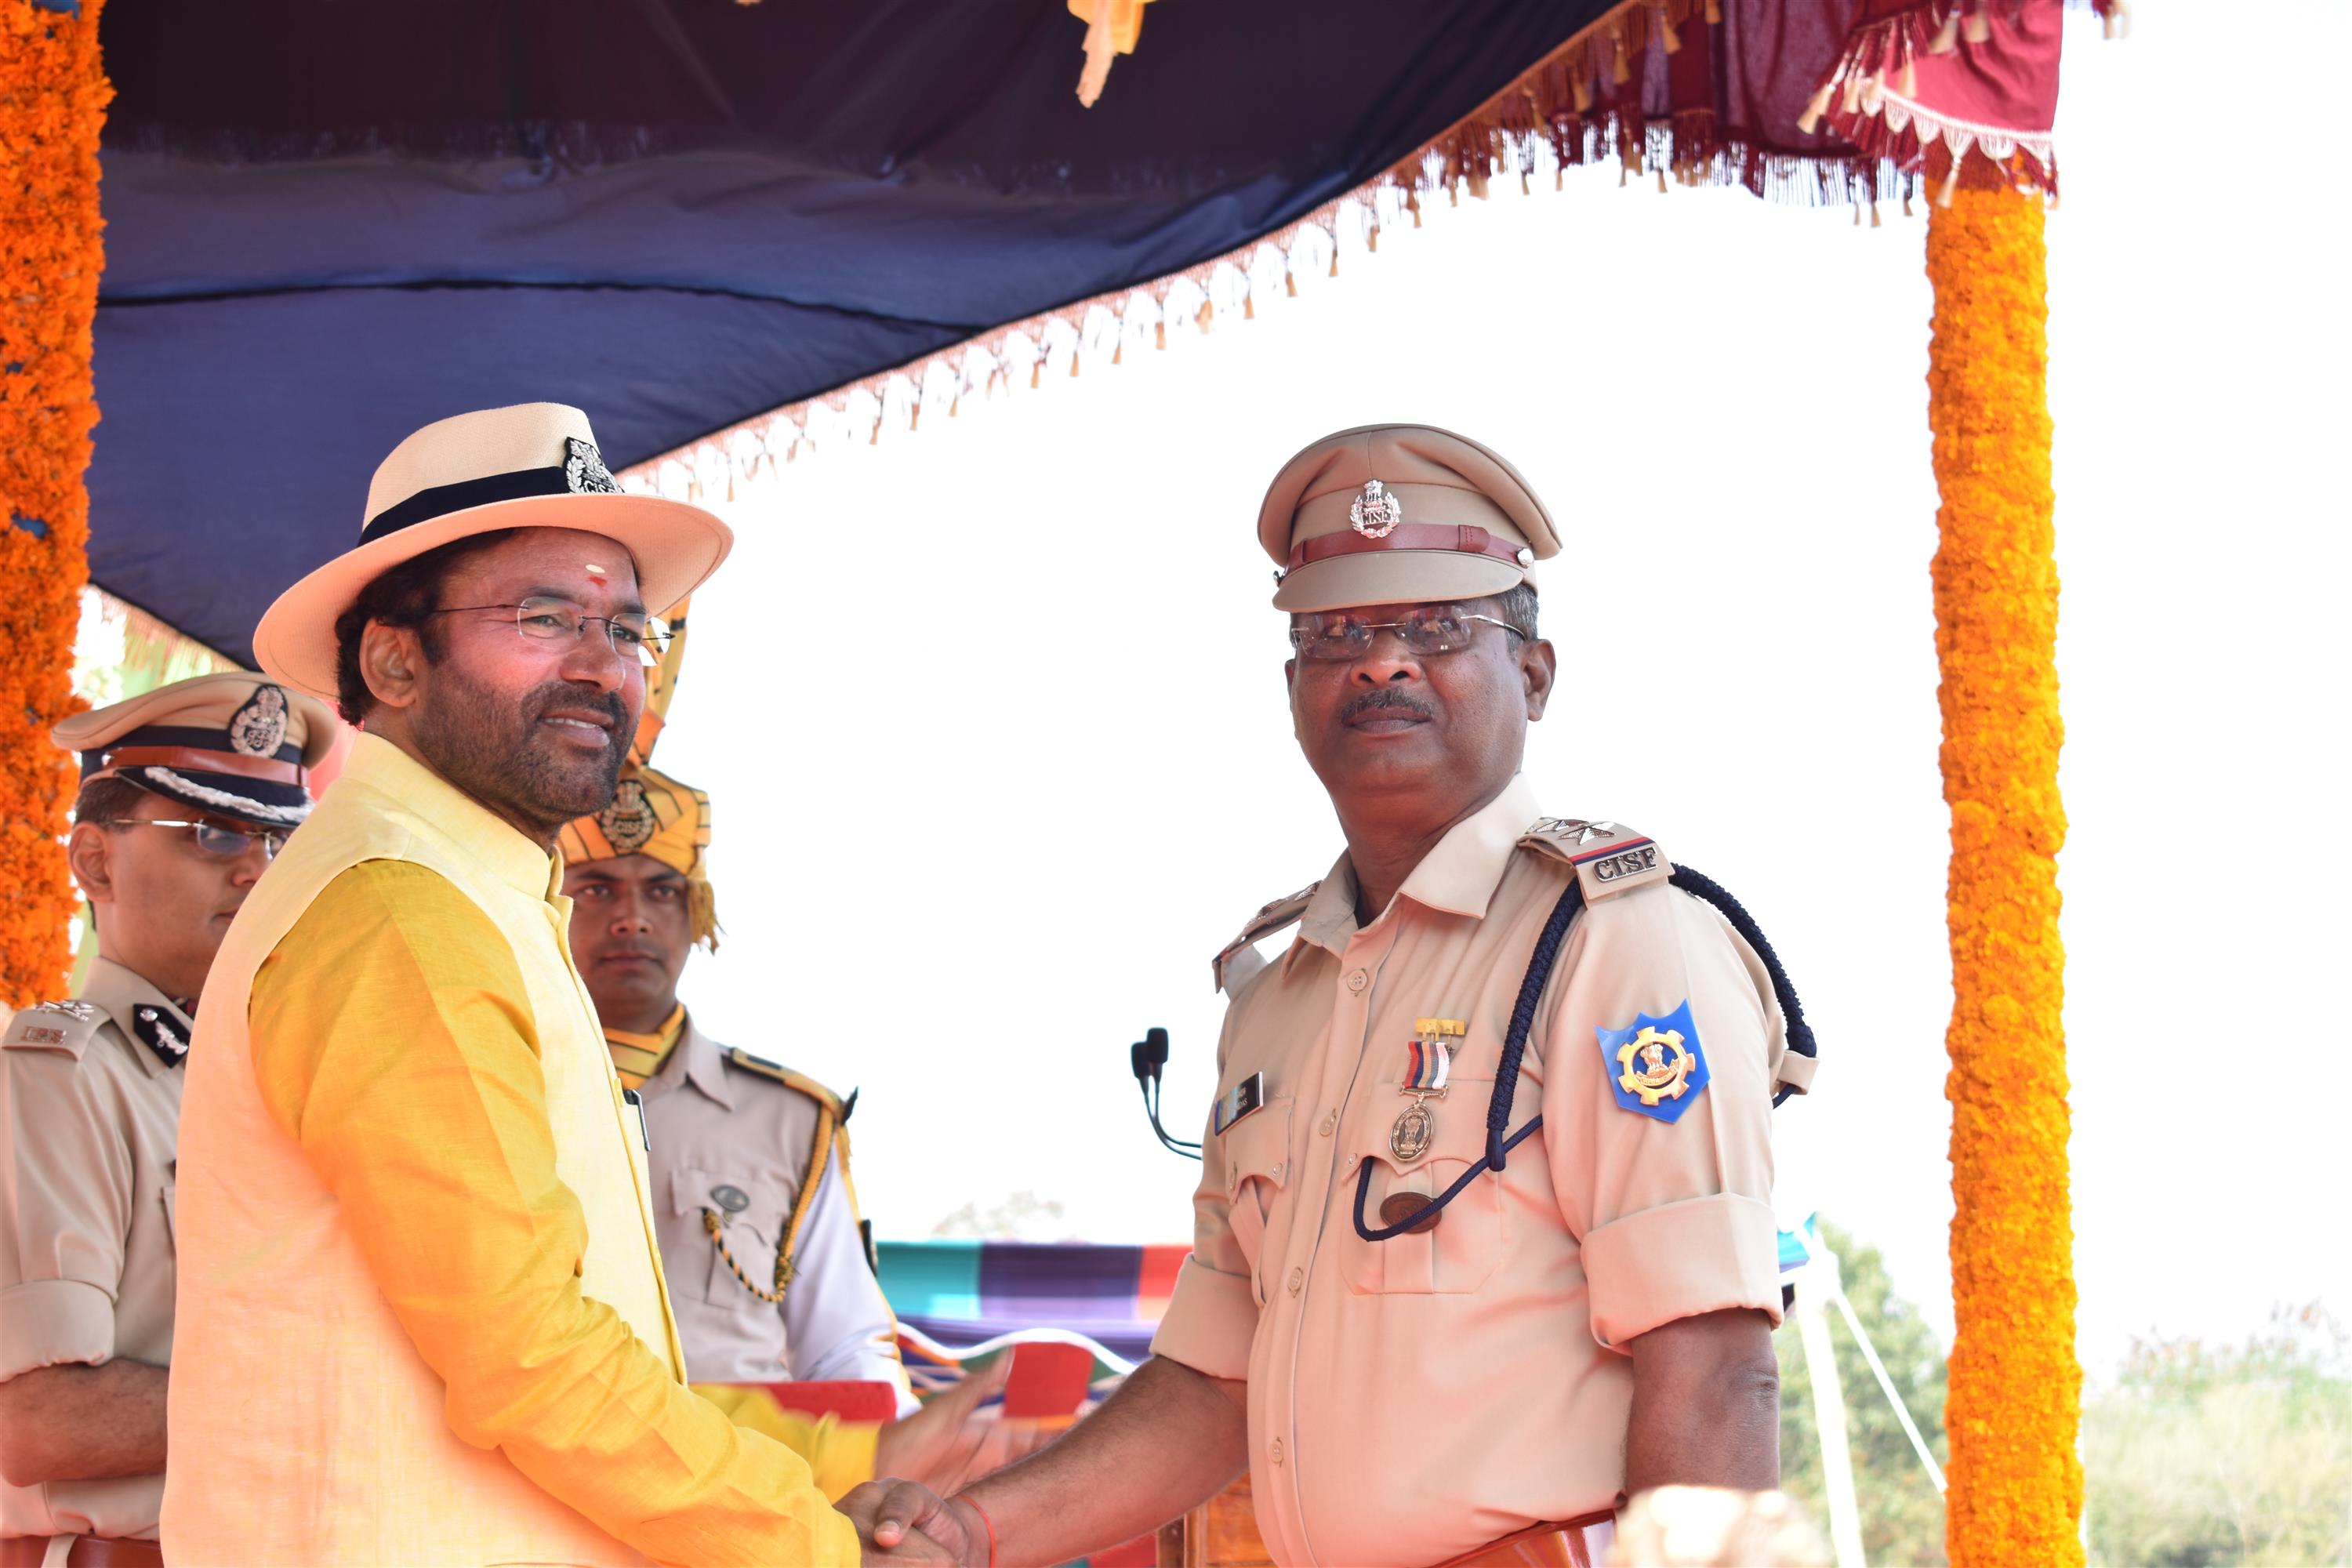 Union Minister of State for Home Affairs ShriKishan Reddy distributes the awards to CISF Officers at CISF RTC, Arakkonam in Tamilnadu on 22 February, 2020.